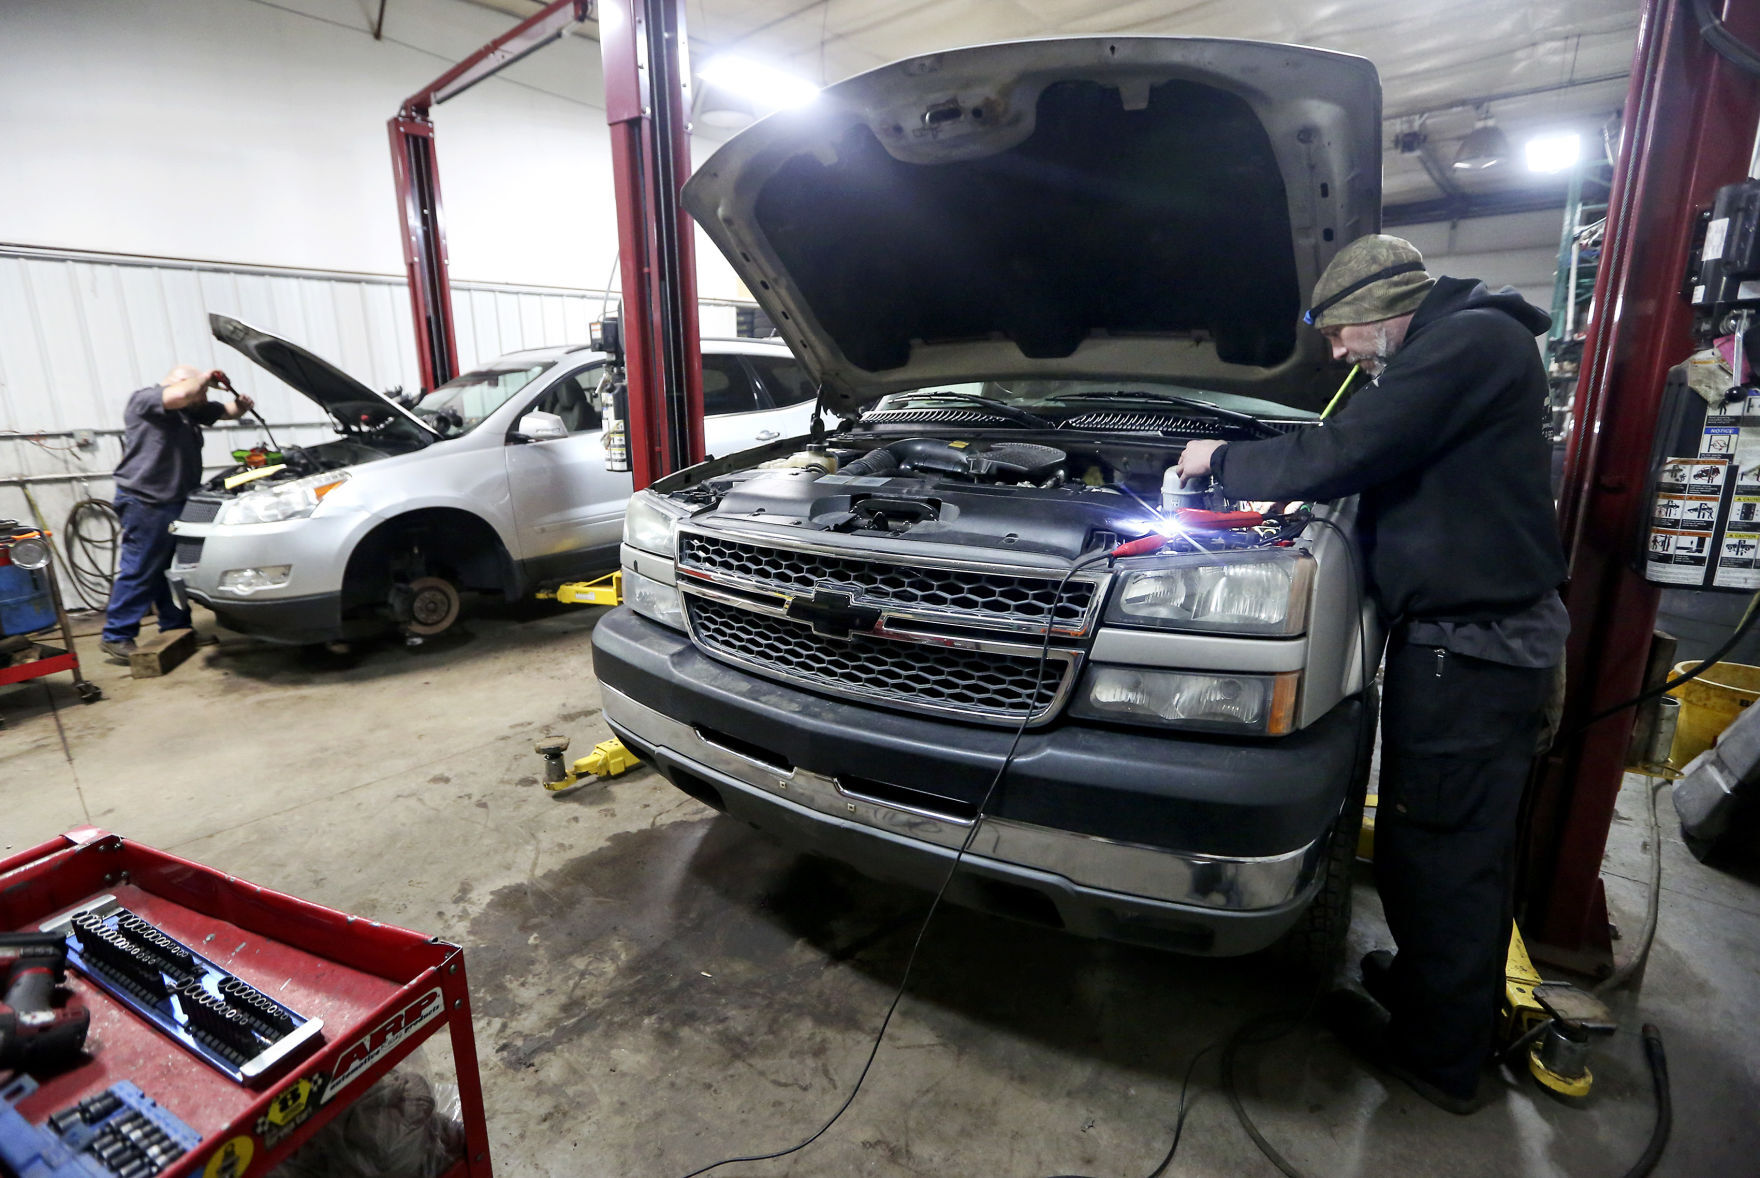 Seth Freeze (left) and Mike Keuter work on vehicles at J’s Performance in Dubuque on Friday. The company plans to move to a new location on Pennsylvania Avenue in the spring. PHOTO CREDIT: NICKI KOHL